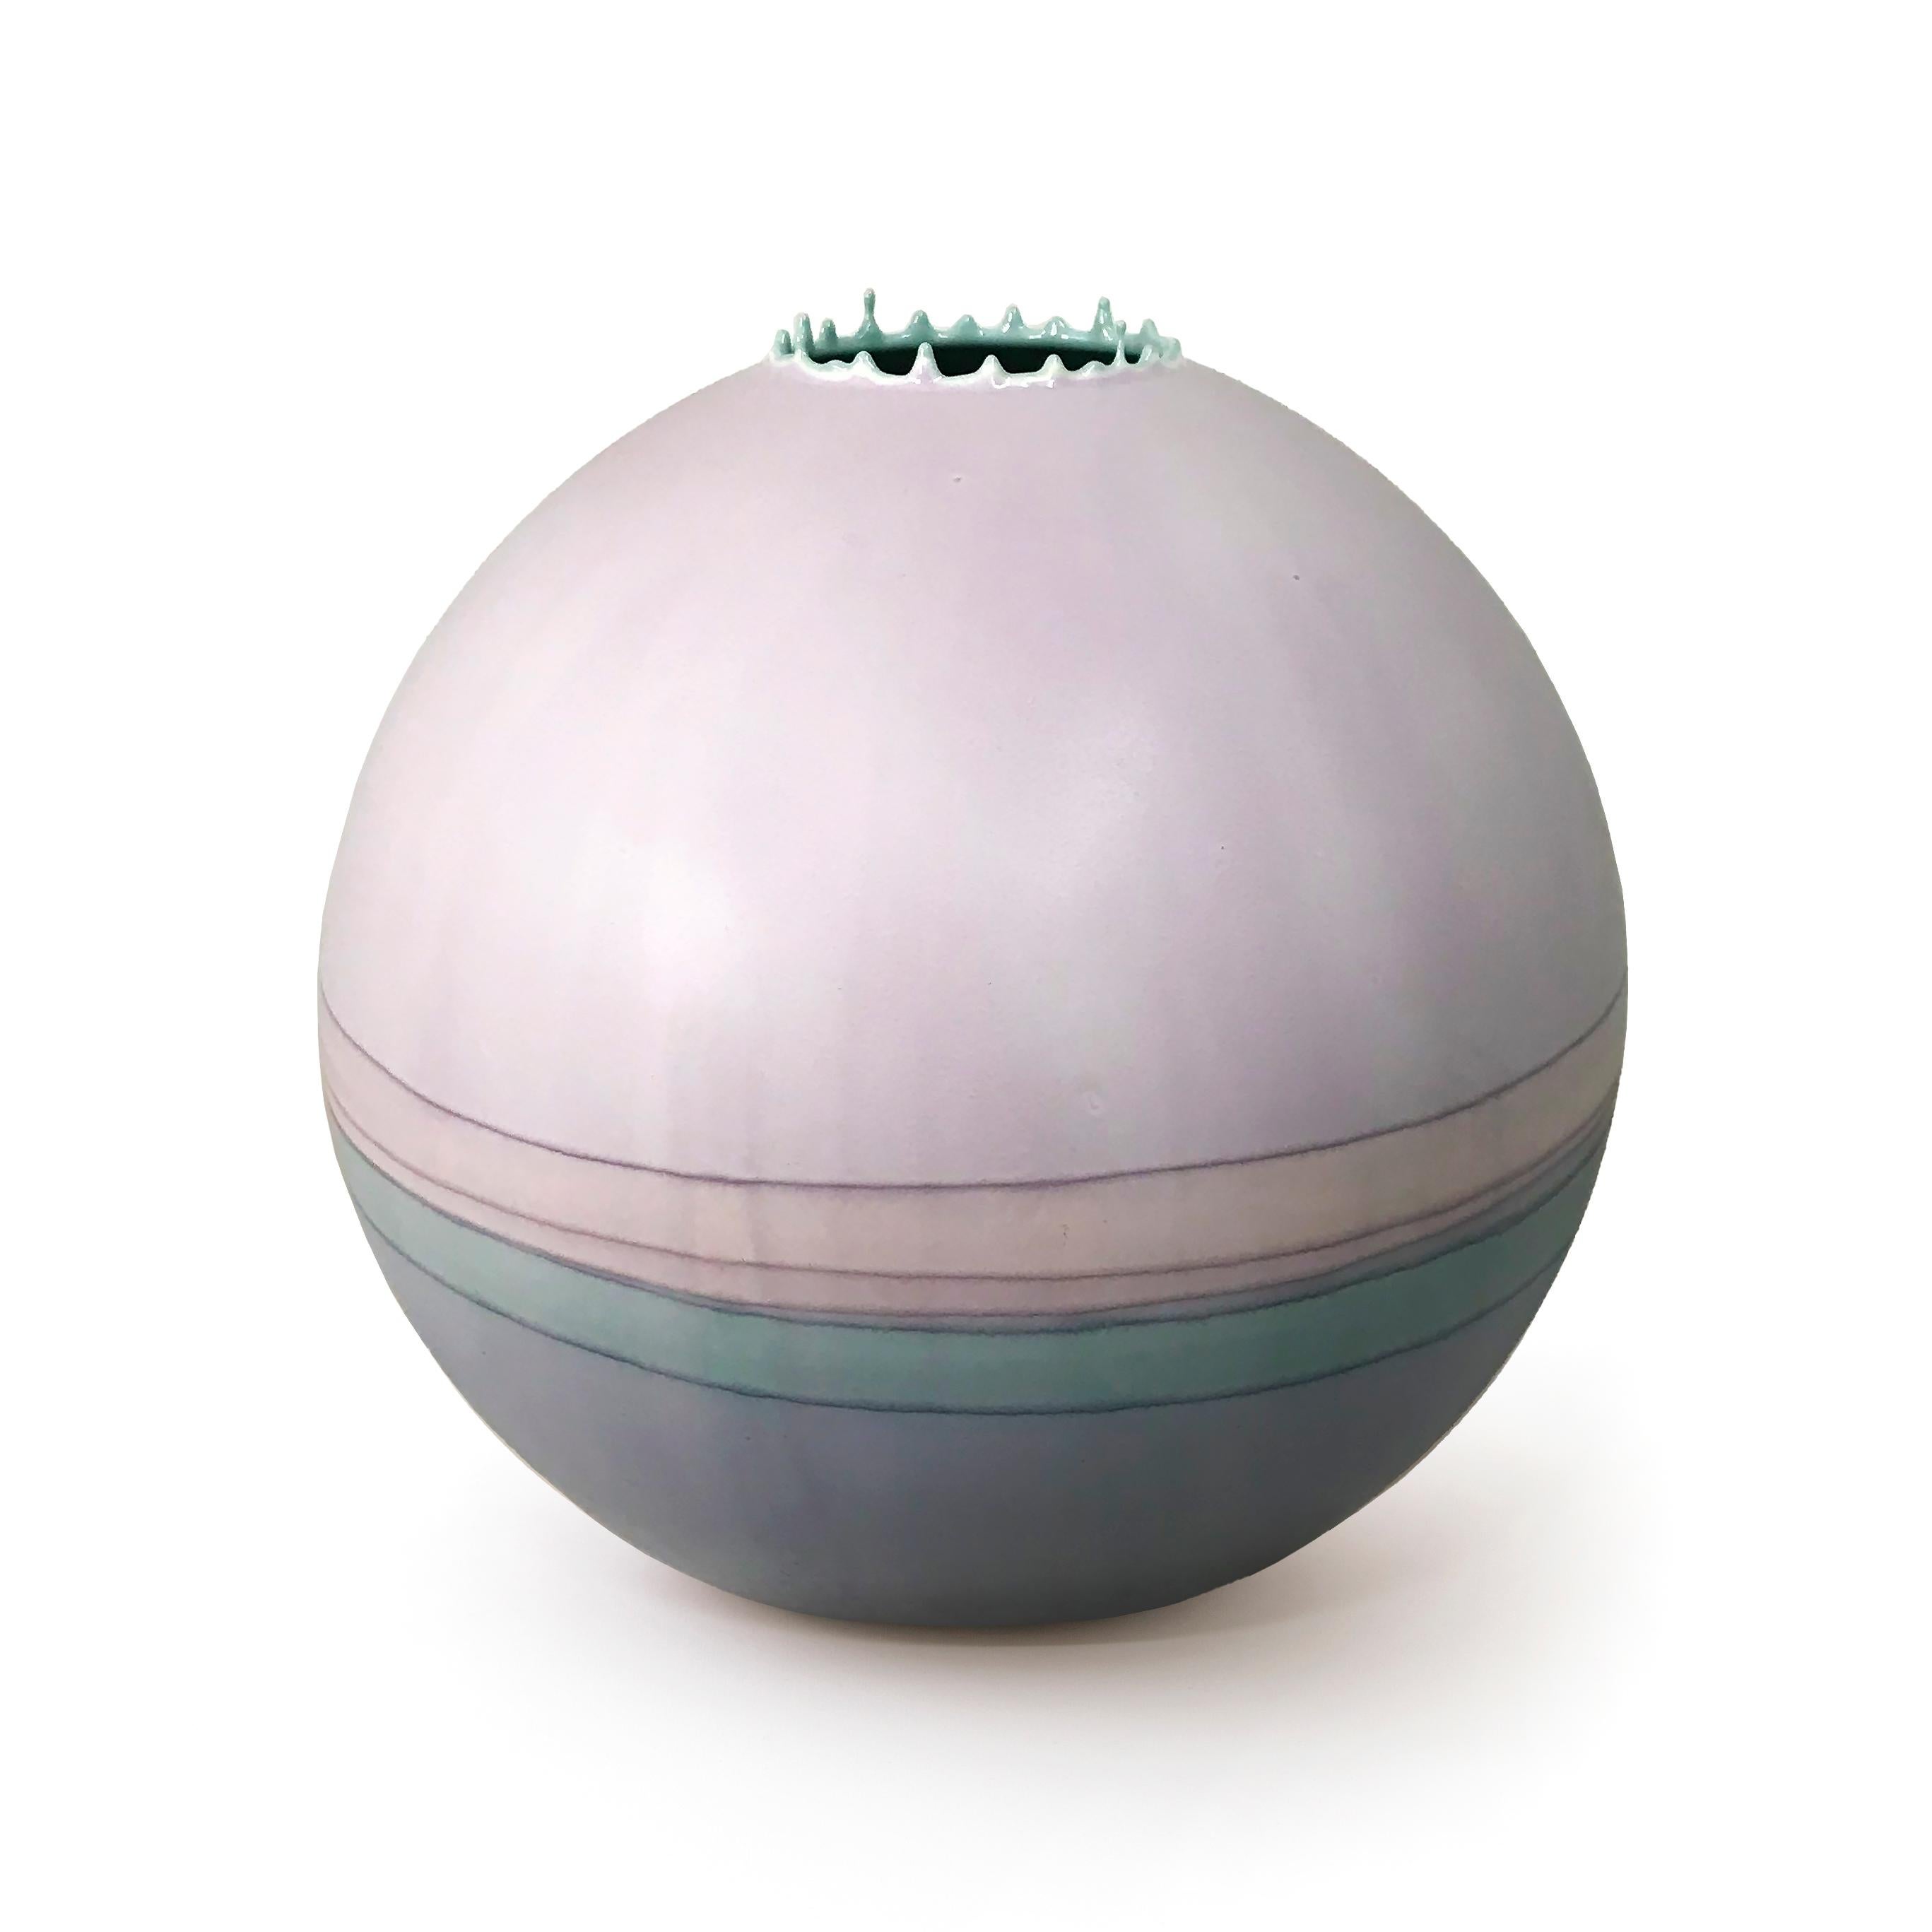 Lilac Ombre Jupiter vase by Elyse Graham
Dimensions: W 28 x D 28 x H 30.5 cm
Materials: Plaster, Resin
Molded, dyed, and finished by hand in LA. Customization
available.
All pieces are made to order.

This collection of vessels is inspired by